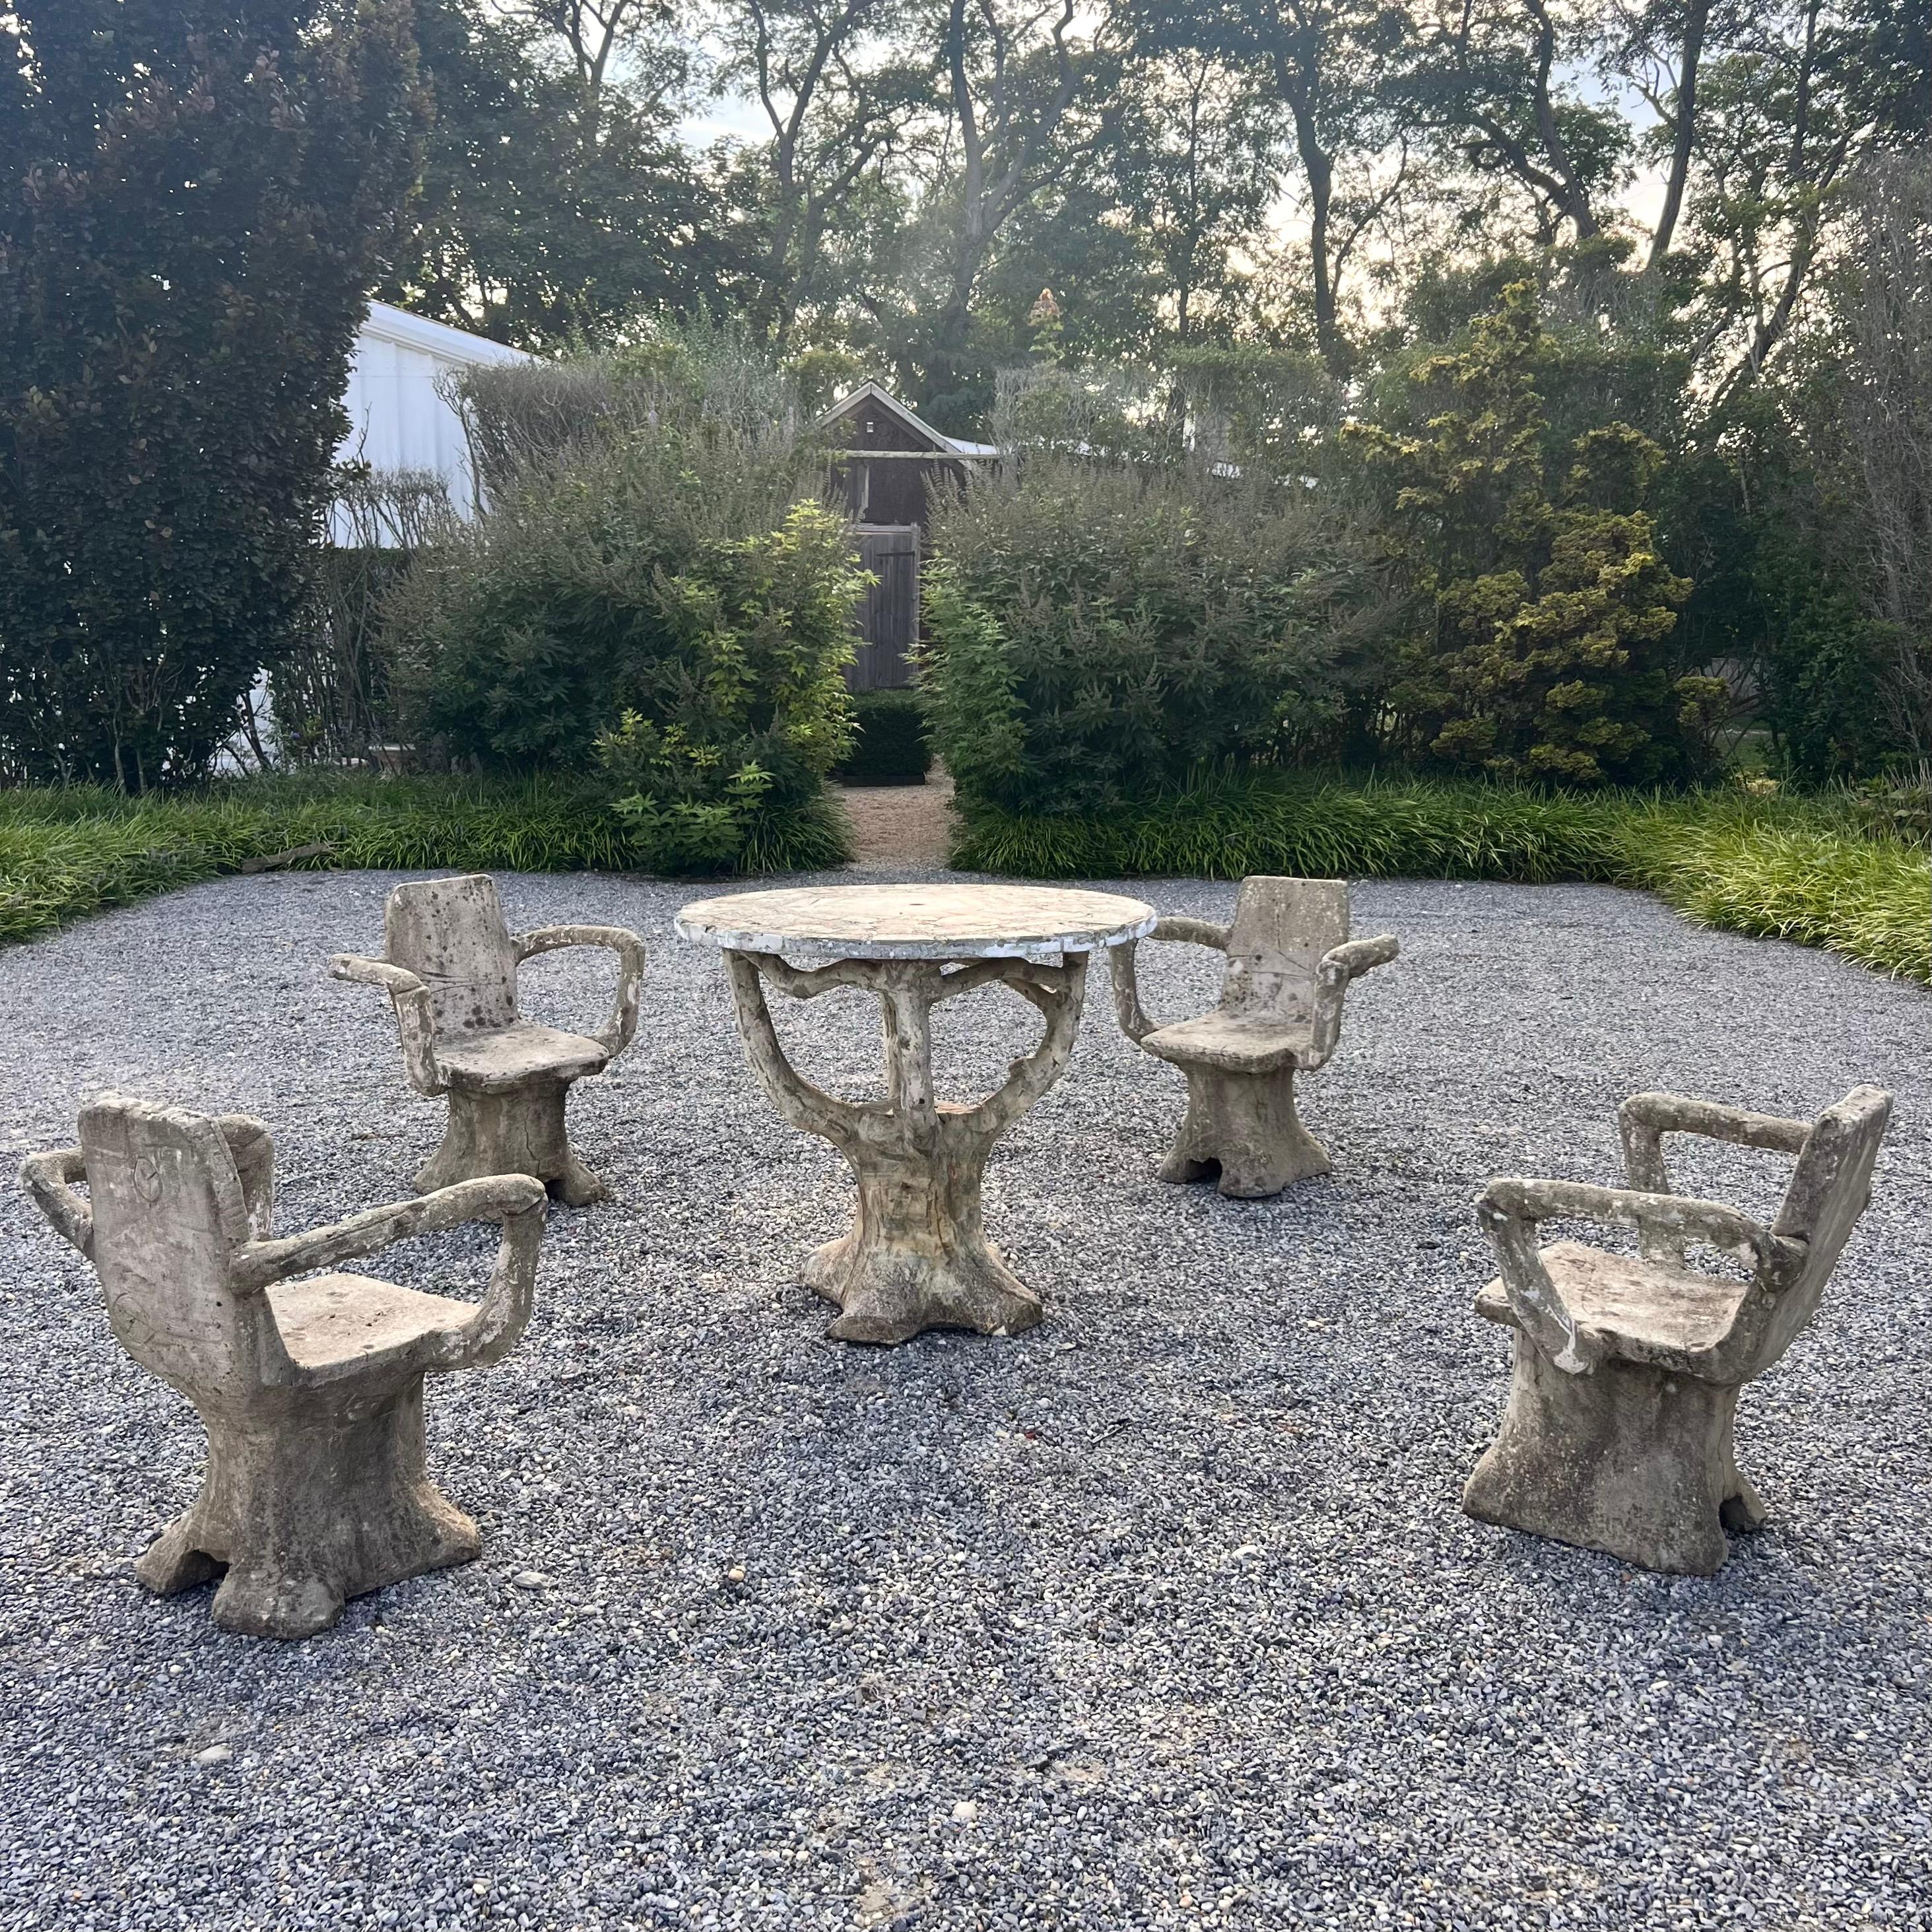 Substantial faux-bois concrete table and stools from France, made in the 1950s. 4 chairs and one table included in this set. Anthropomorphic style to arms of chair. Legs and table base resemble tree trunks and branches with great realistic design.